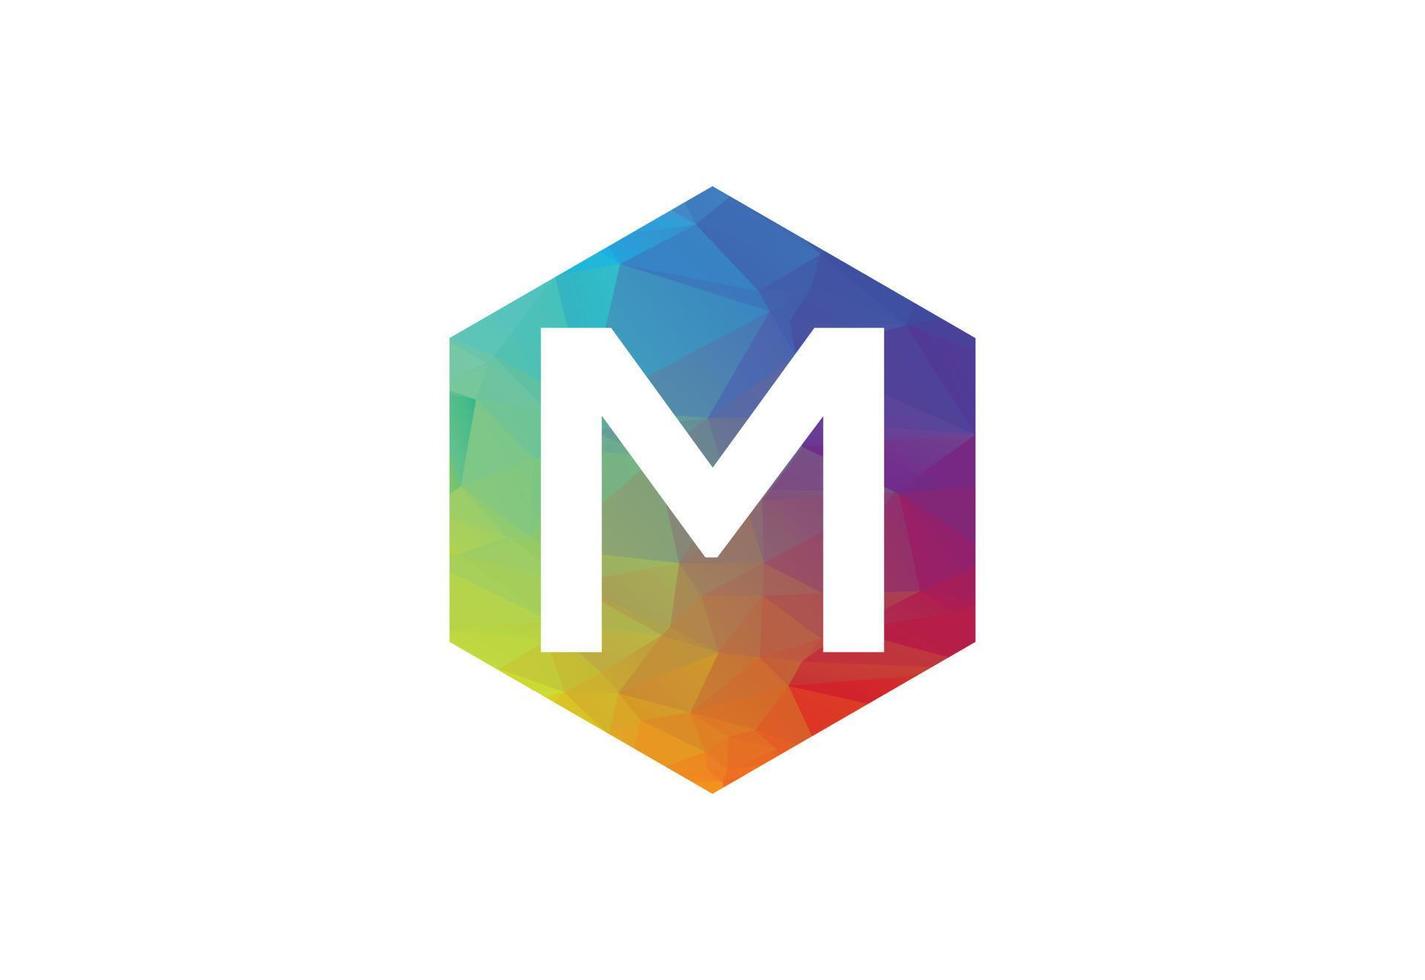 Colourful Low Poly and initial M letter logo design, Vector illustration